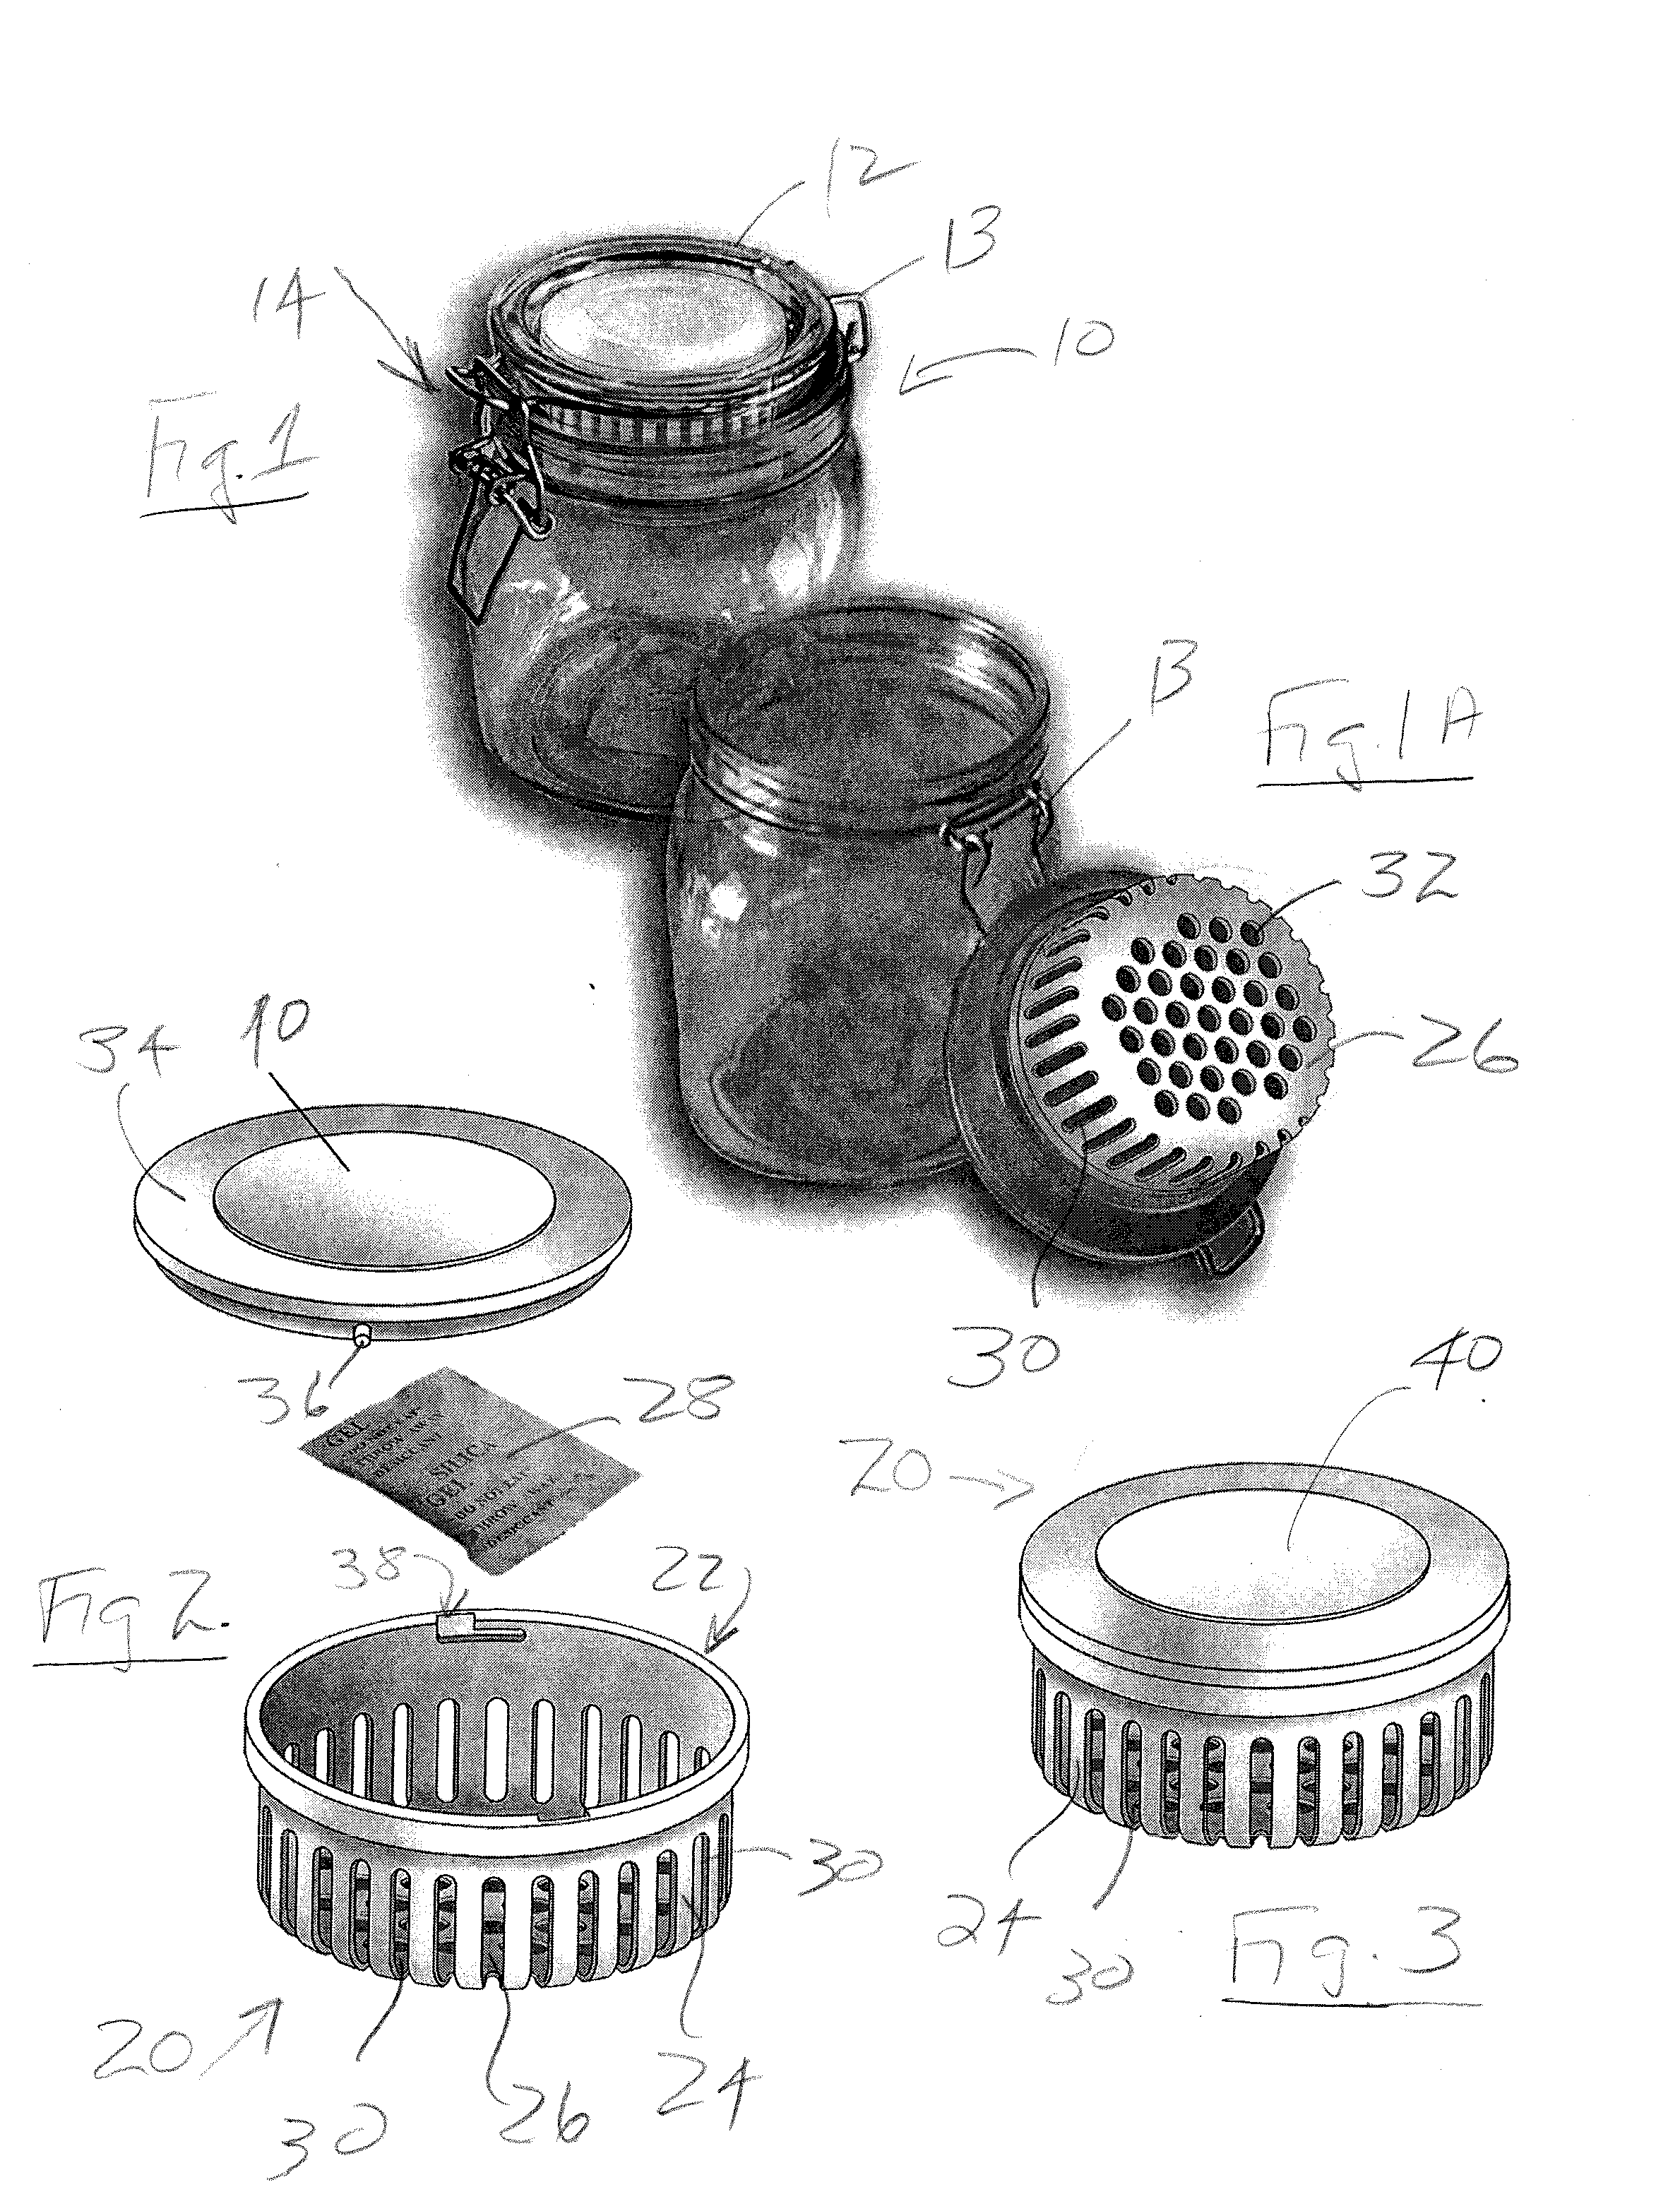 Storage container for holding desiccant and insert to convert standardized storage container to hold desiccant